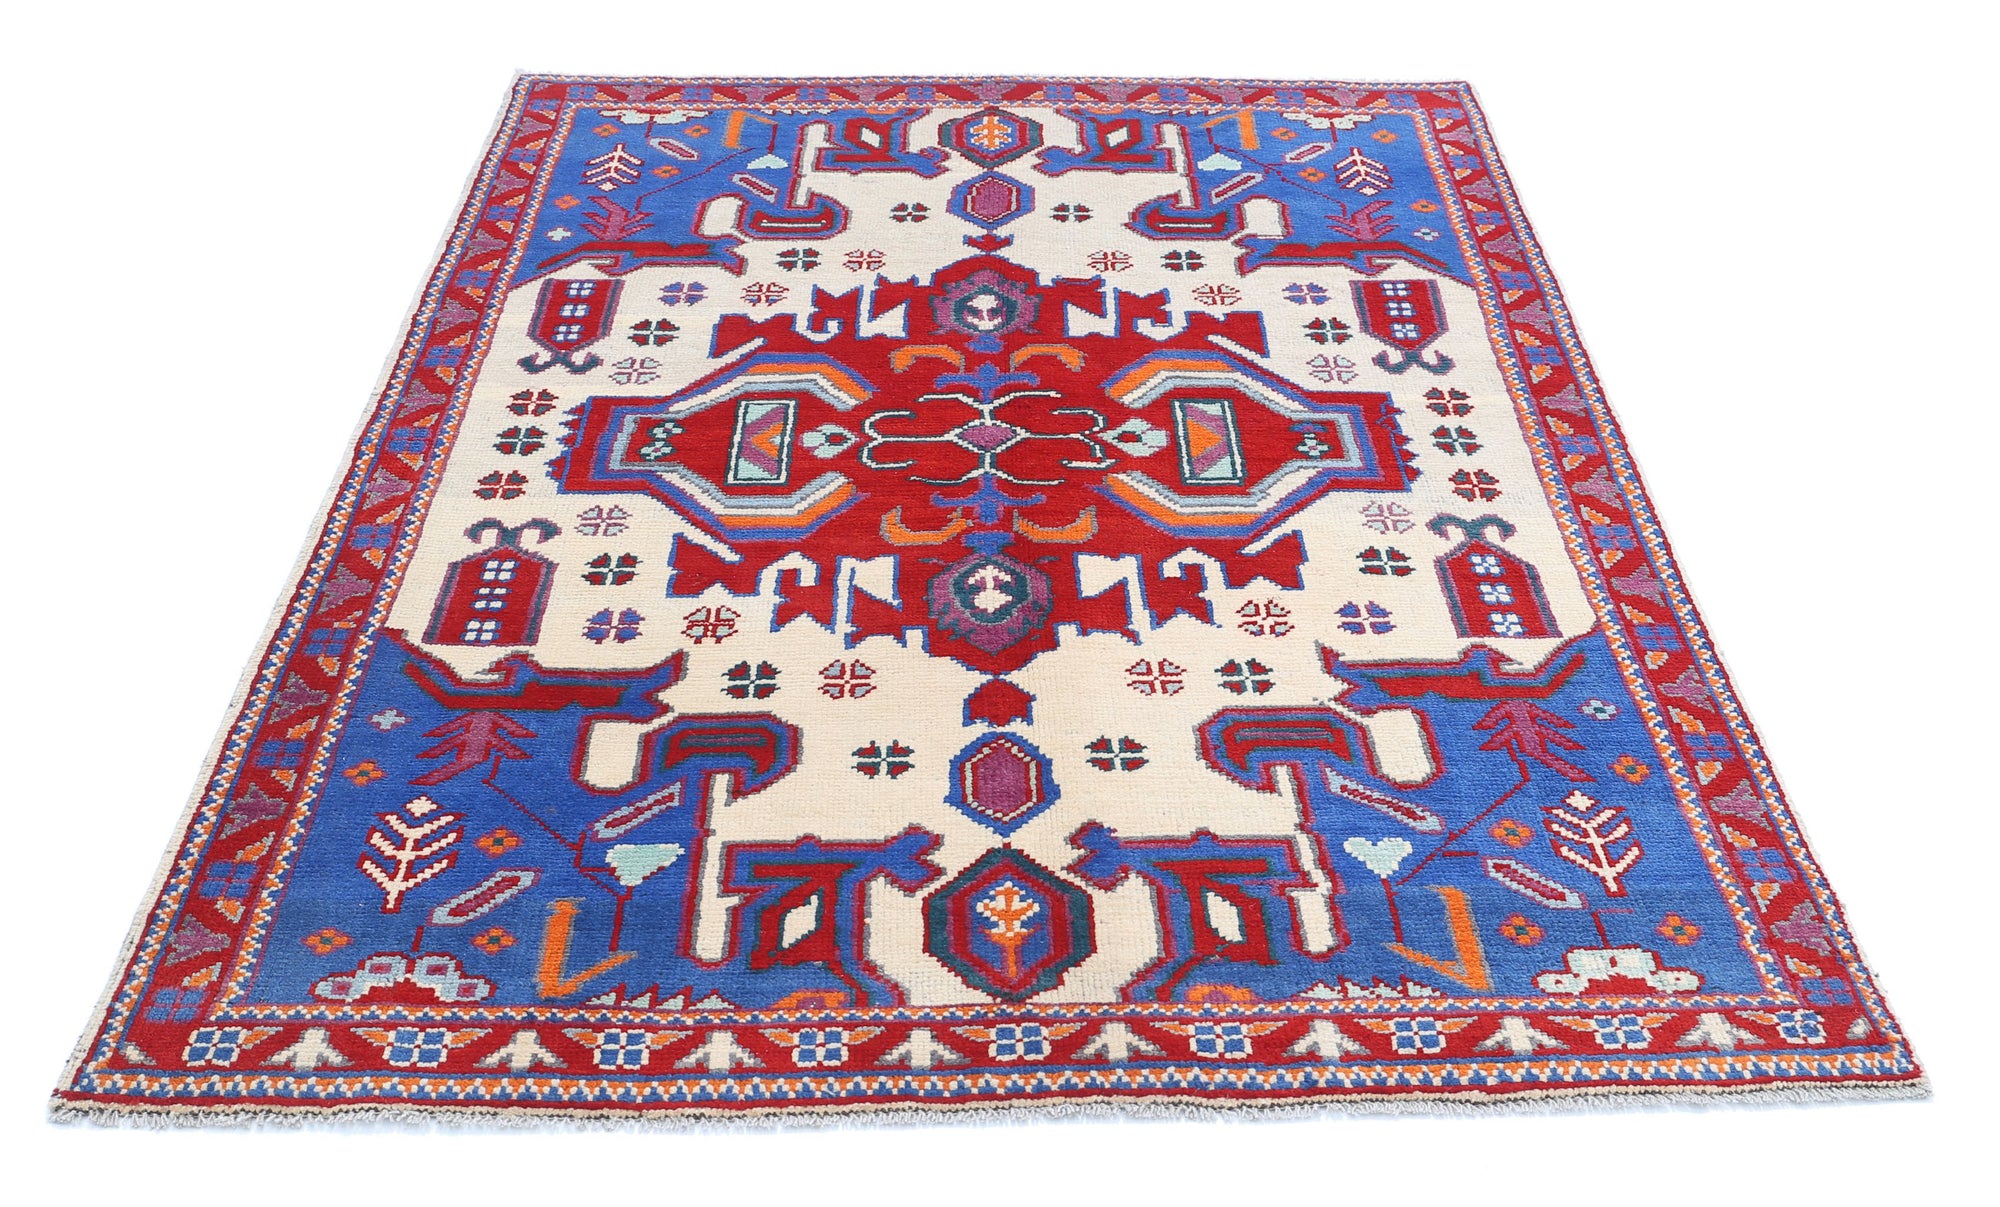 Revival-hand-knotted-qarghani-wool-rug-5014094-3.jpg